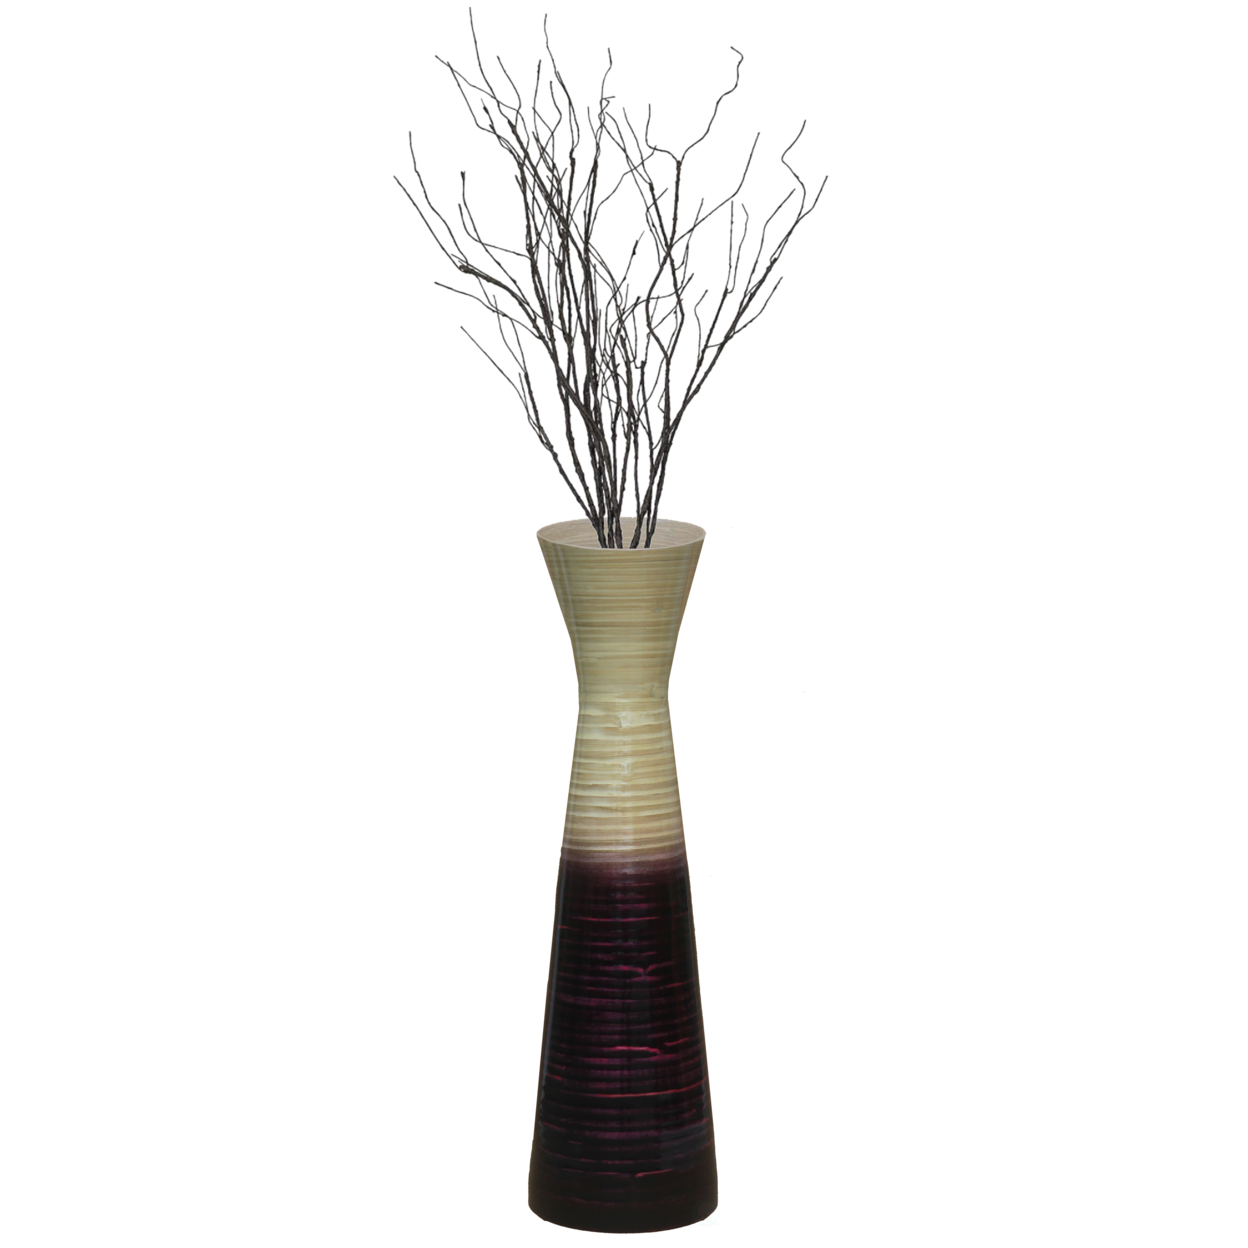 Uniquewise 27 Contemporary Bamboo Floor Flower Vase Hourglass Design For Dining, Living Room, Entryway Decoration - Purple